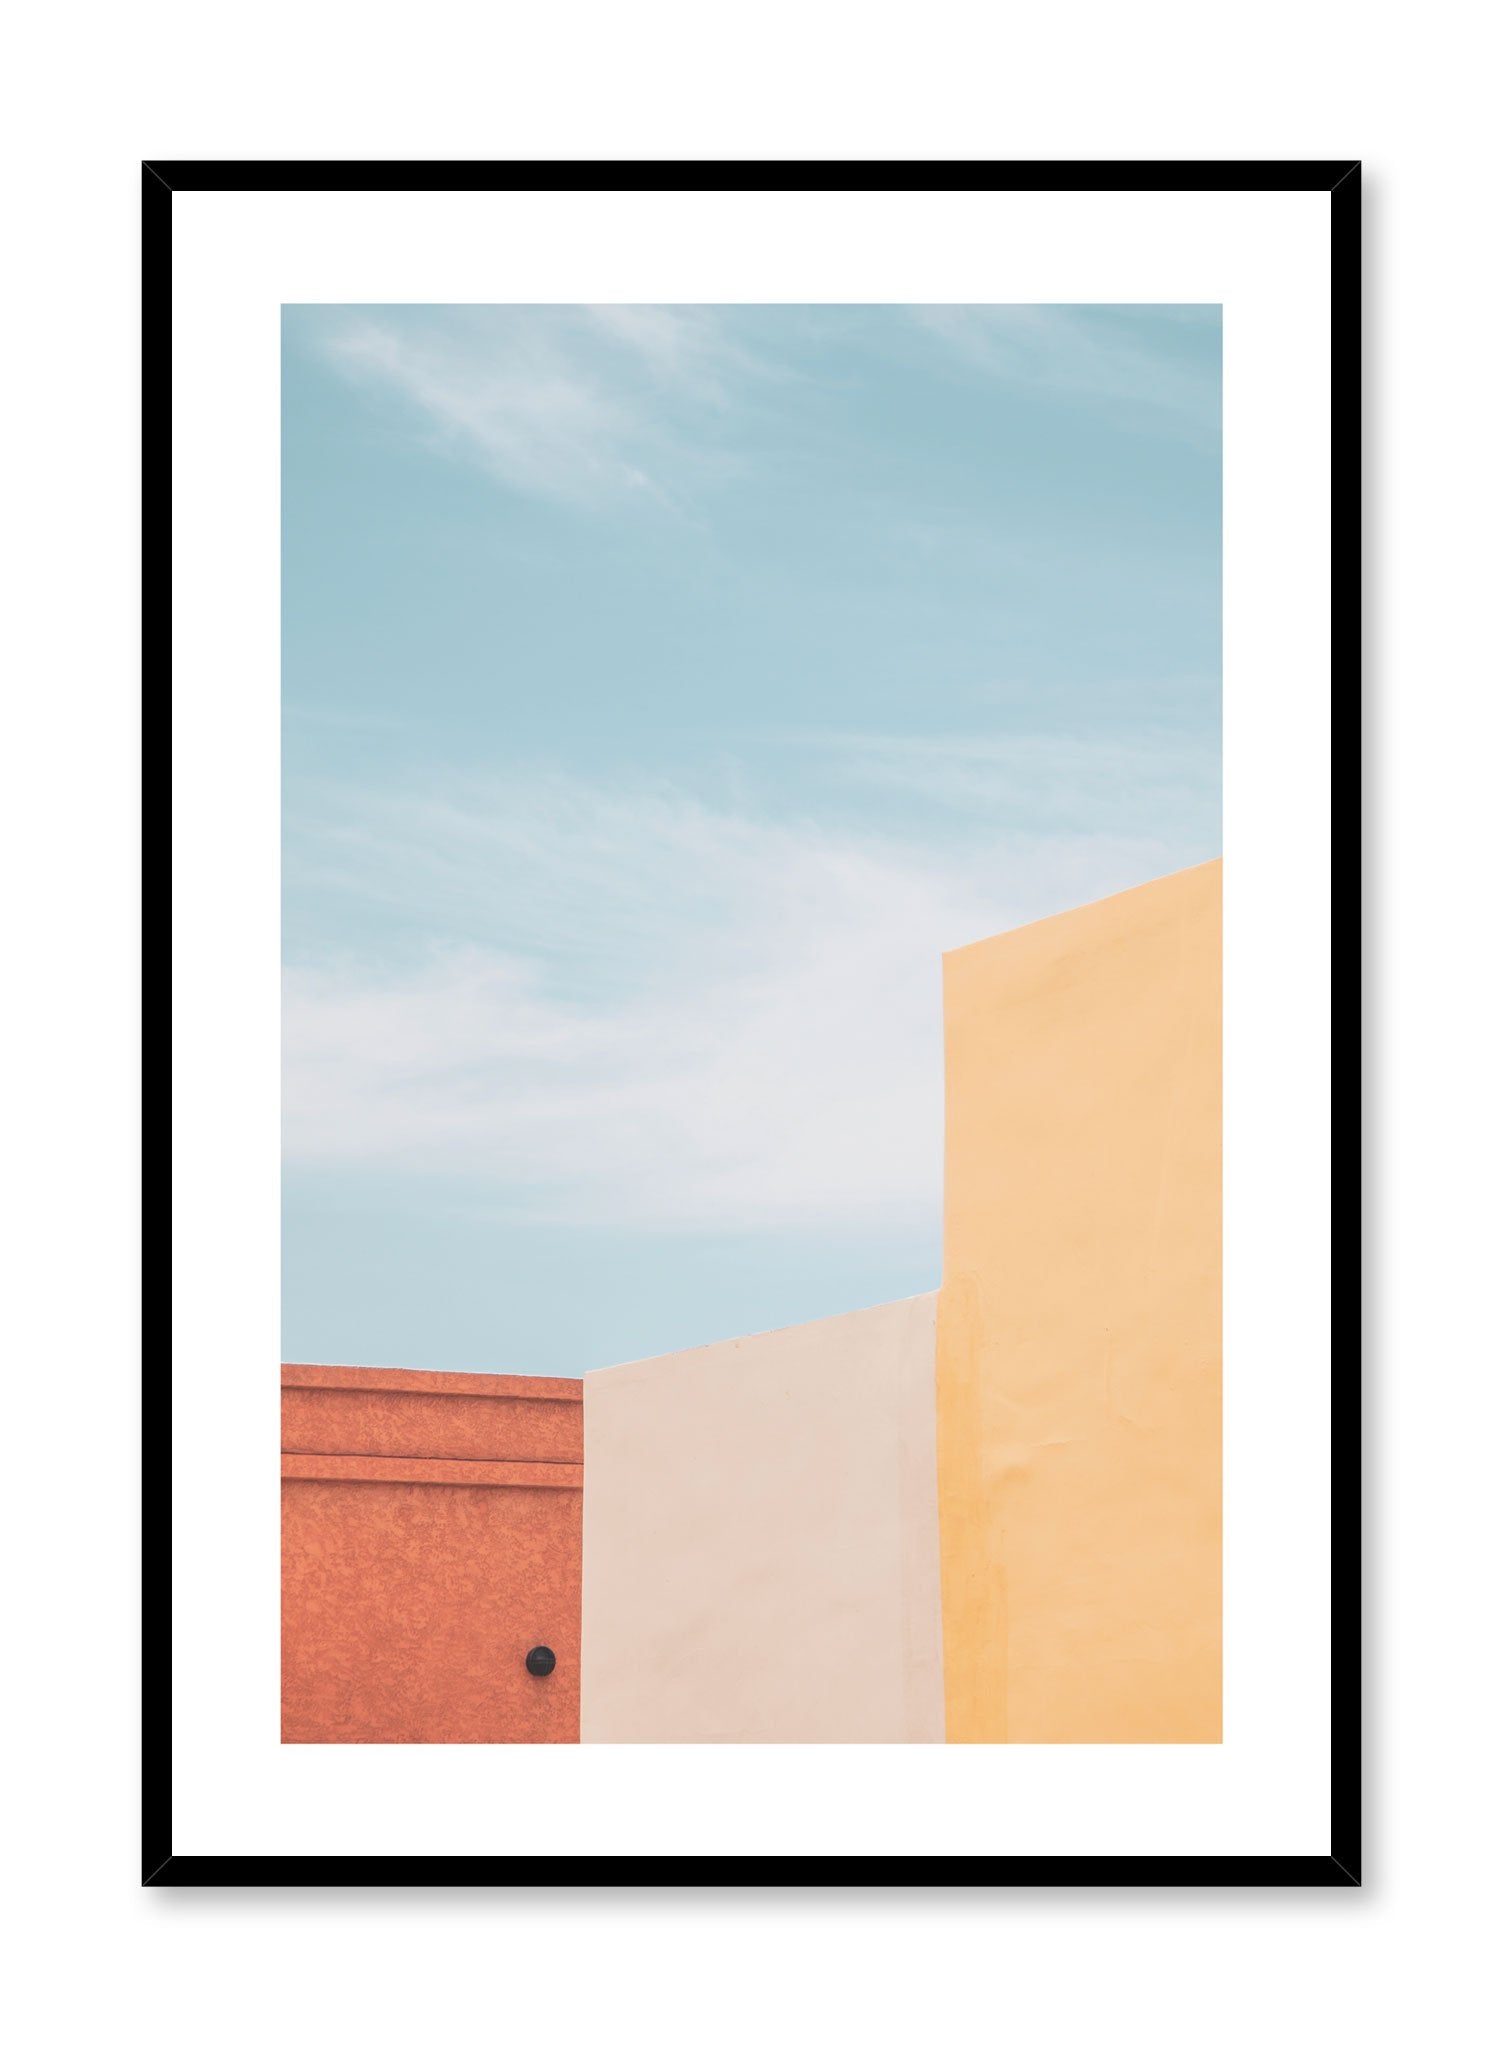 Minimalist design poster by Opposite Wall with photography of trio of bright colour buildings